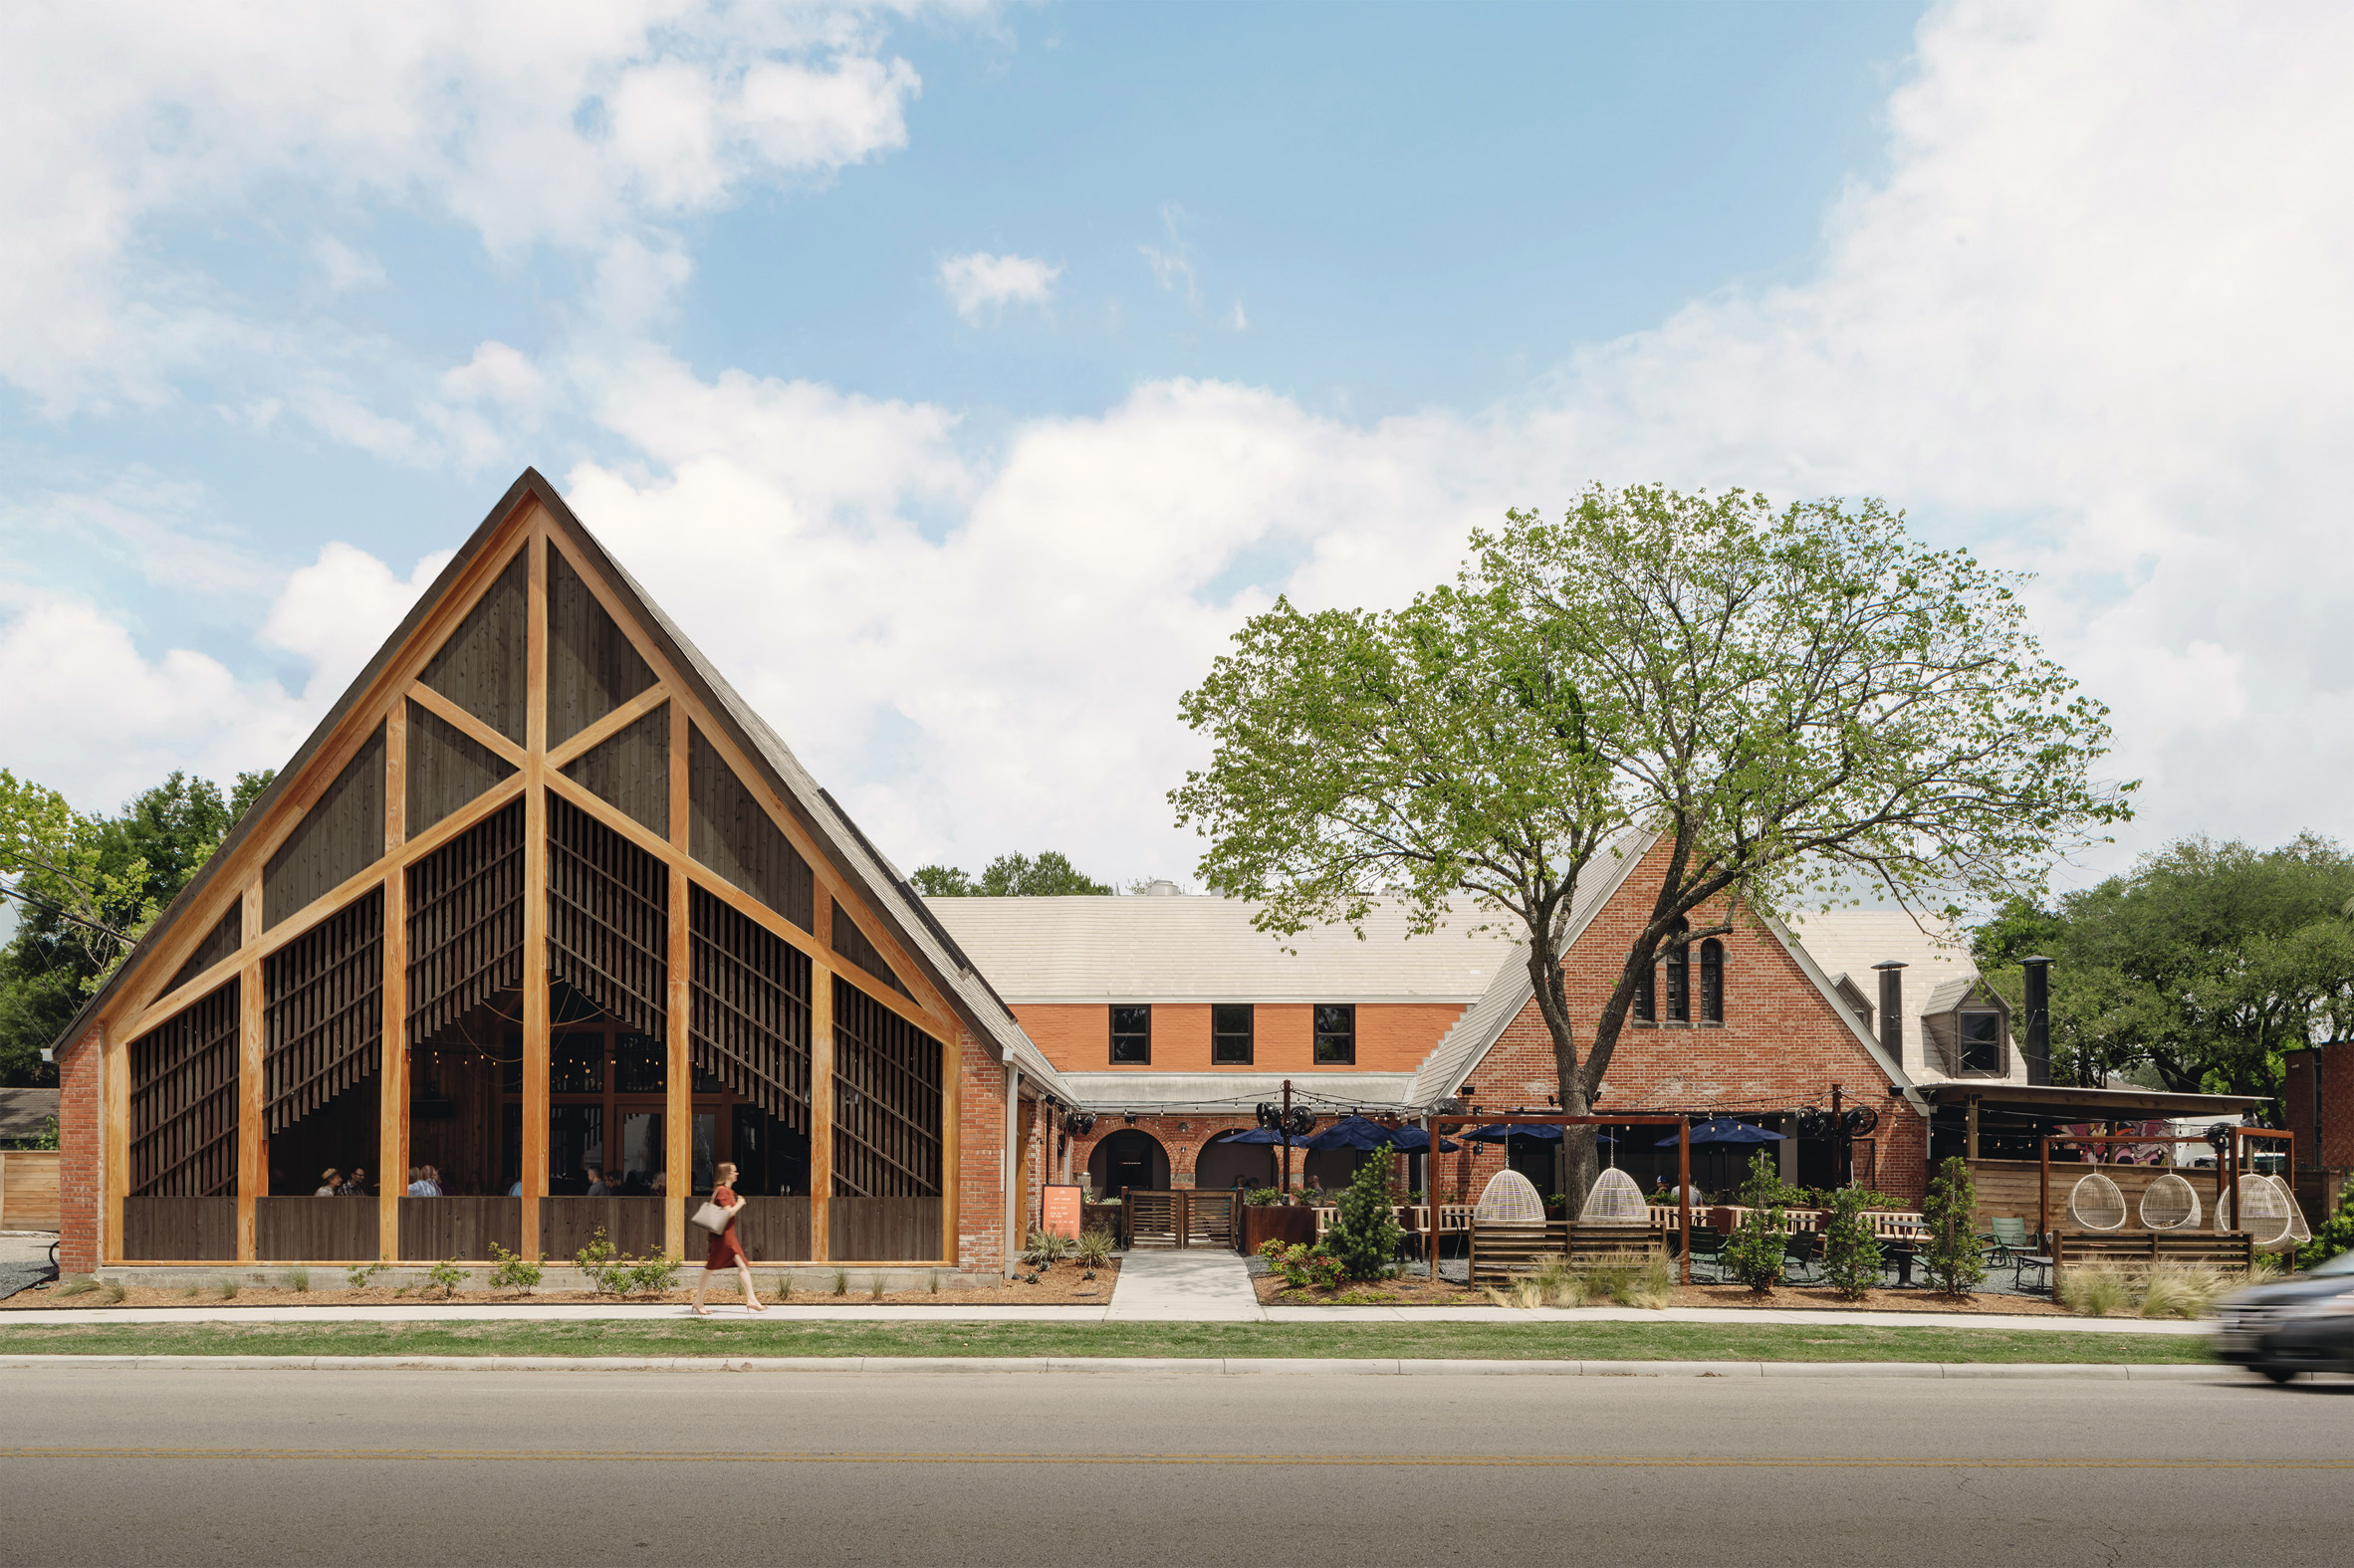 Exterior of gabled church with exposed timber structure converted into restaurant in Texas